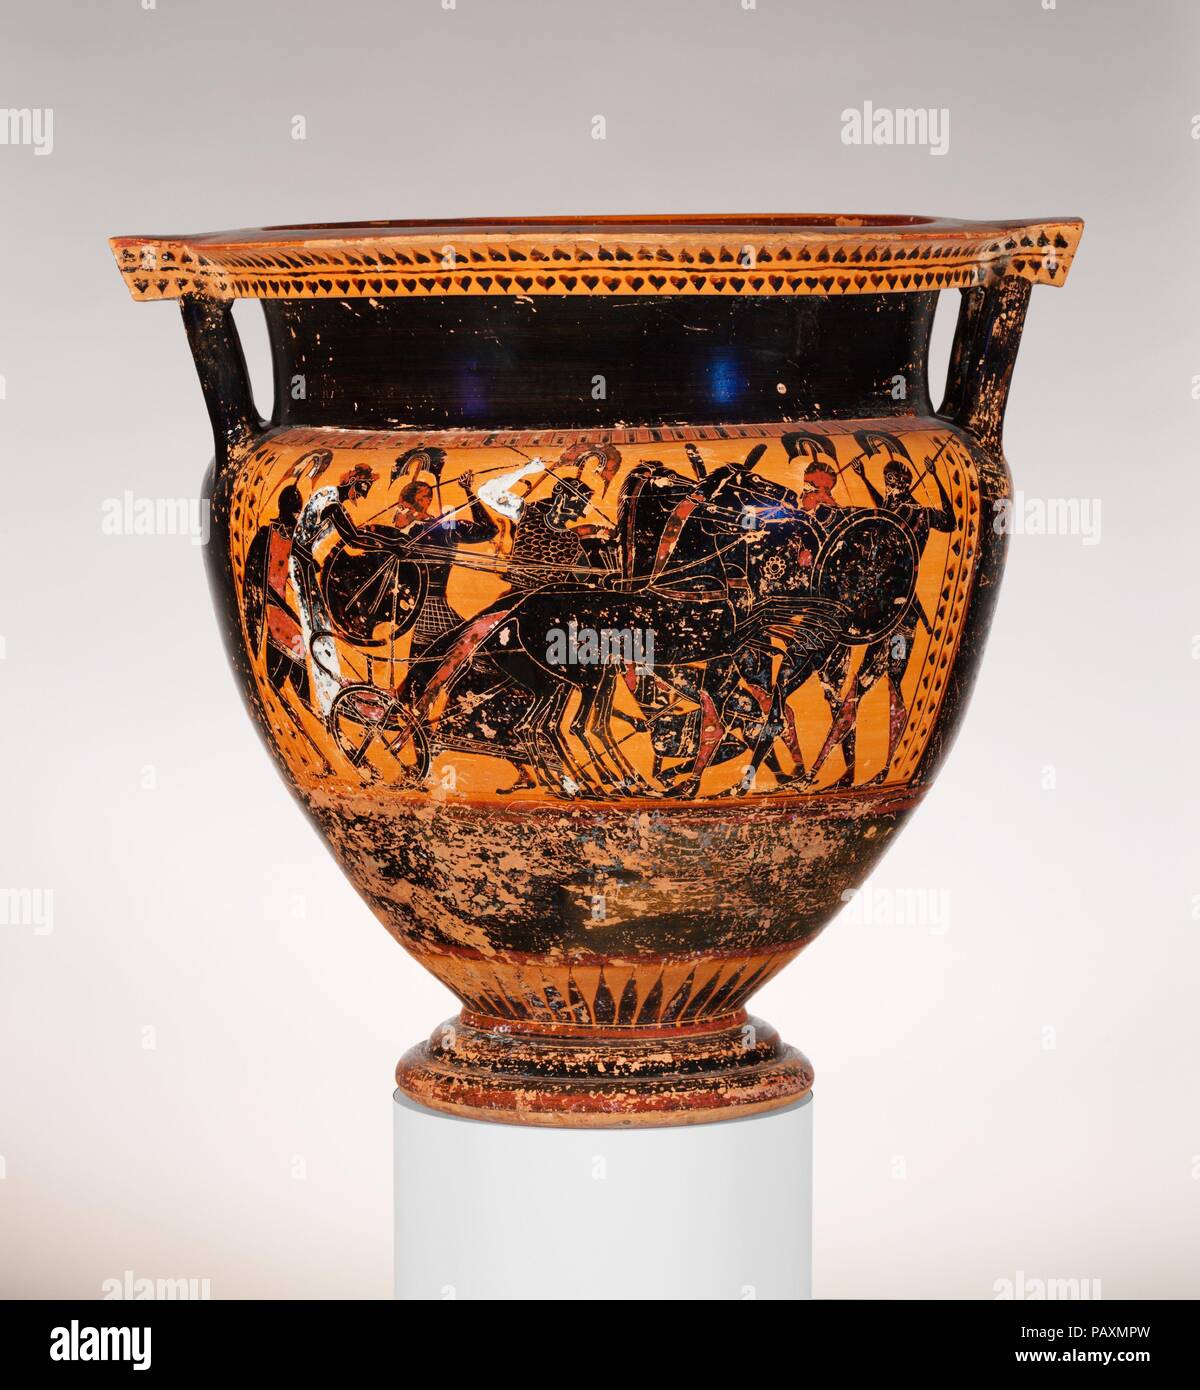 Terracotta column-krater (bowl for mixing wine and water). Culture: Greek, Attic. Dimensions: H. 19 7/8 in. (50.5 cm)  diameter of mouth  18 3/4 in. (47.6 cm). Date: ca. 540 B.C..  Obverse, Gigantomachy (battle of gods and giants)  Reverse, Dionysos with satyrs and maenads  During the latter part of the sixth century B.C., black-figure artists mastered their medium sufficiently to create compositions with many figures in action and in complex spatial relationships. Battle scenes were ideal subjects. The presence of Athena identifies the combatants here. The arms and armor are those that contem Stock Photo